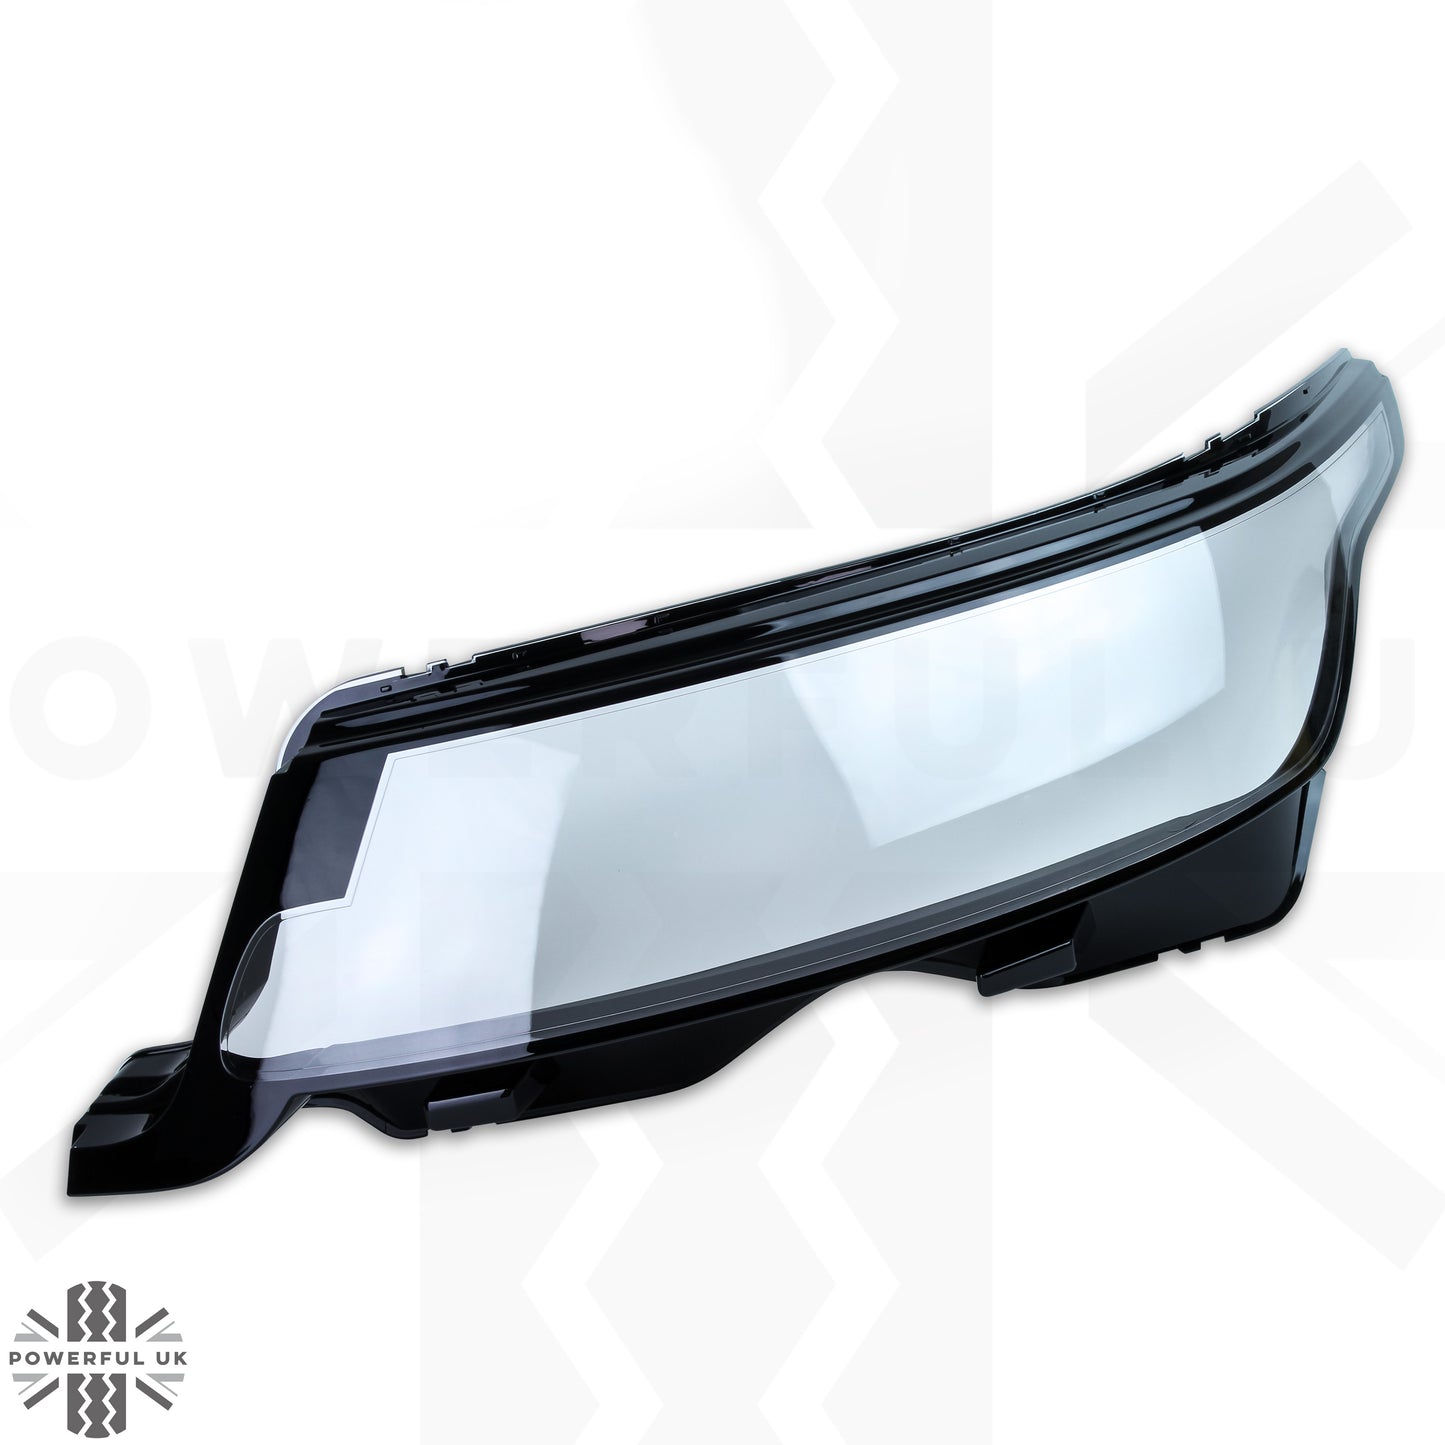 Replacement Headlight Lens for Range Rover Sport 2018 - LH